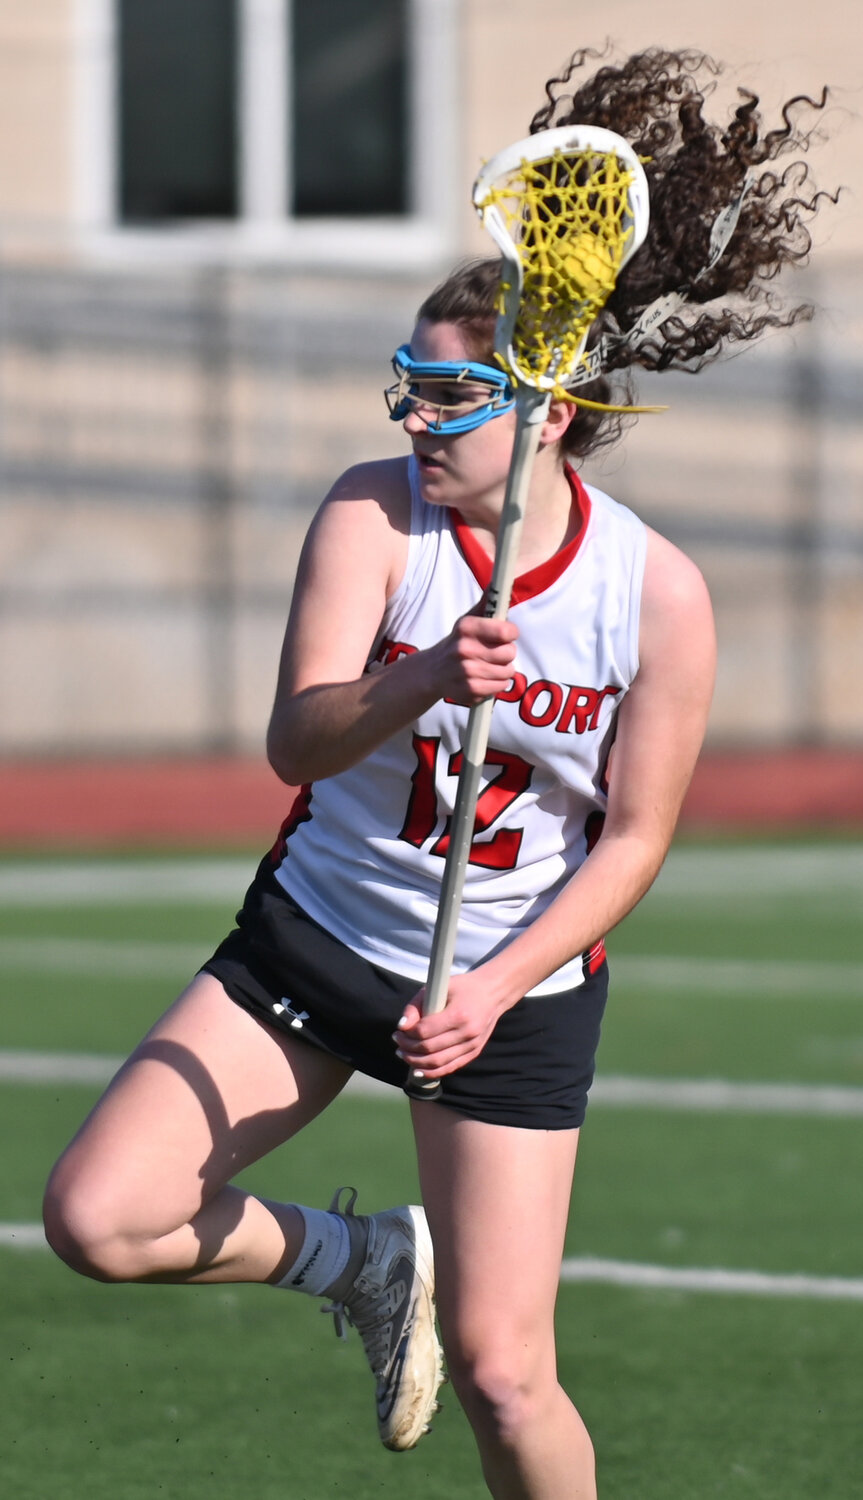 Junior attacker Cassie Smith (56 goals) was a force all spring for the Red Devils and picked up her 100 th career goal May 9.